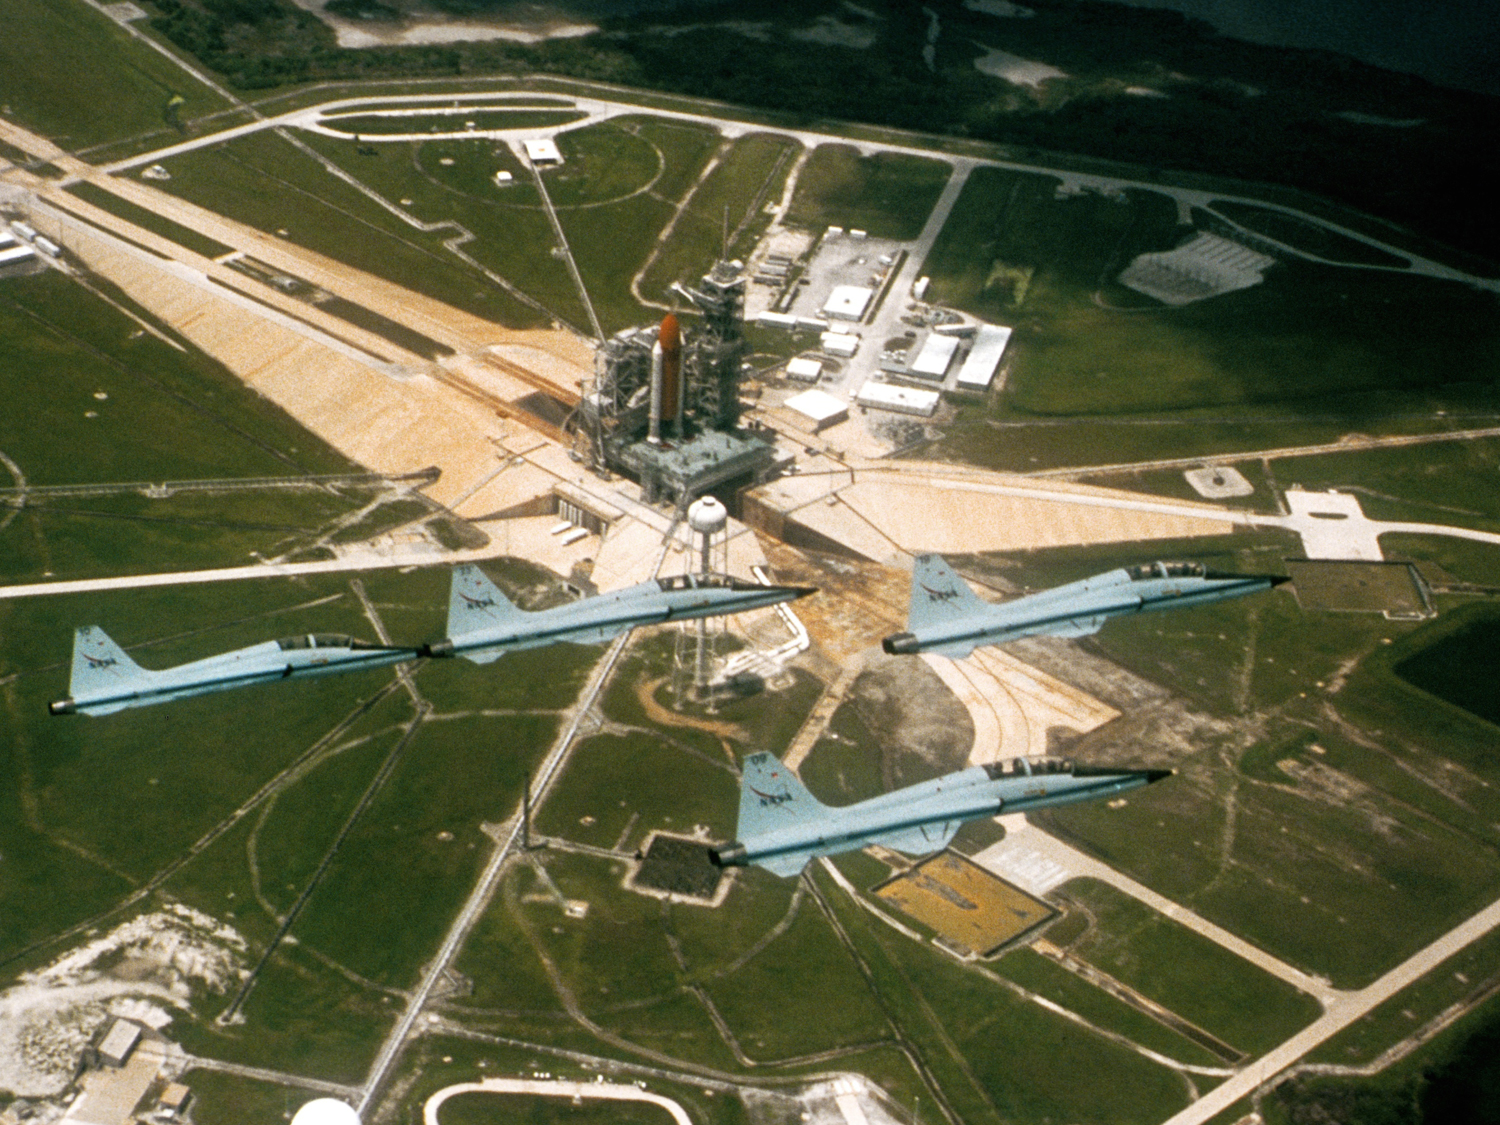  View from my T-38 during Pad 39A flyby prior to STS-94 launch (photo Don Thomas) 